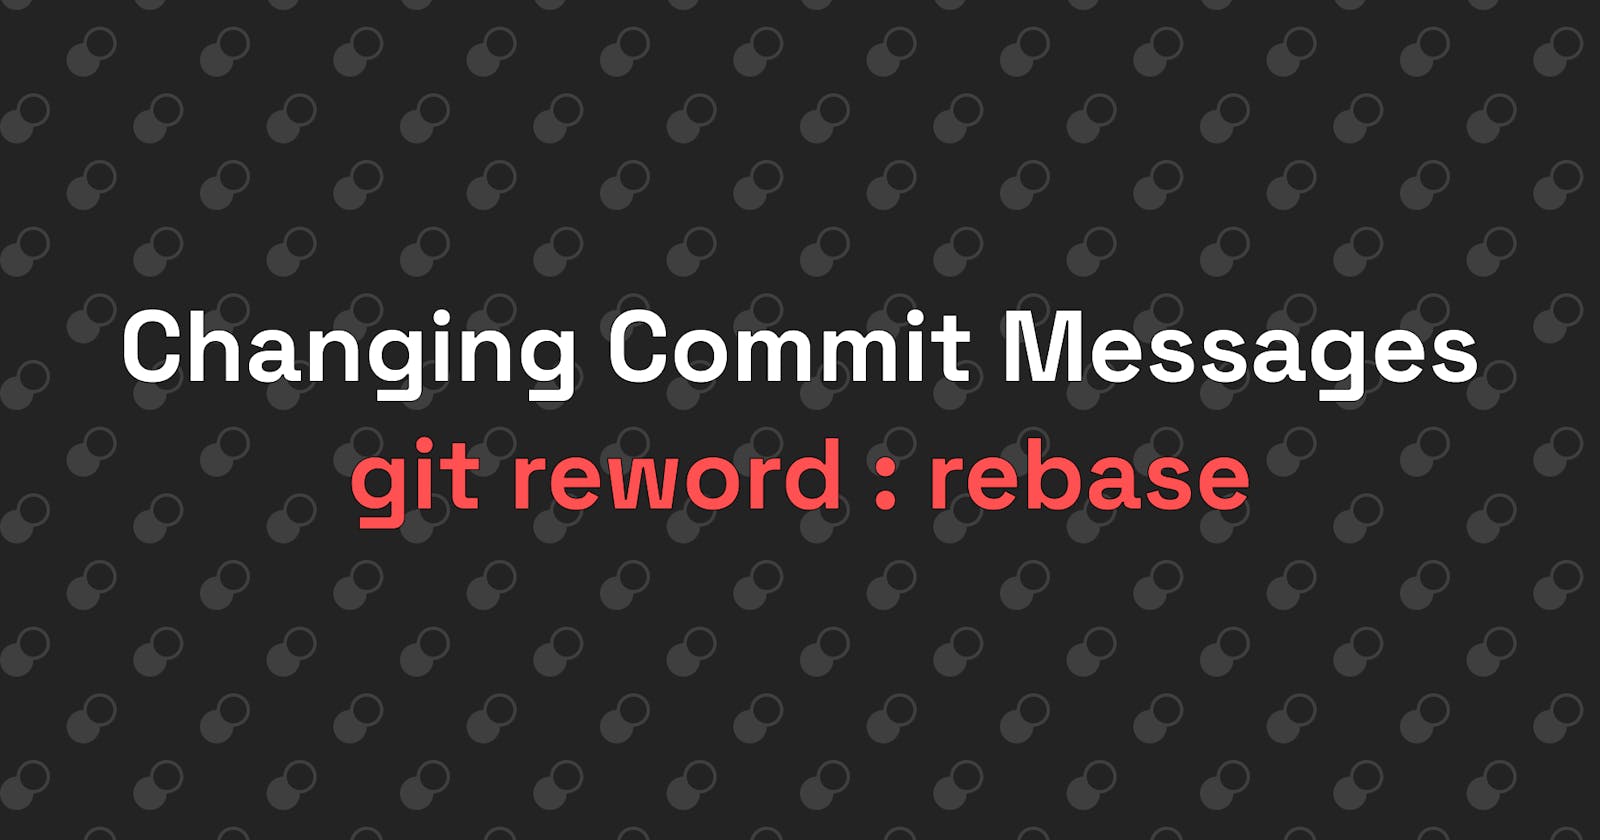 Reword : Change Commit Messages of existing Commits